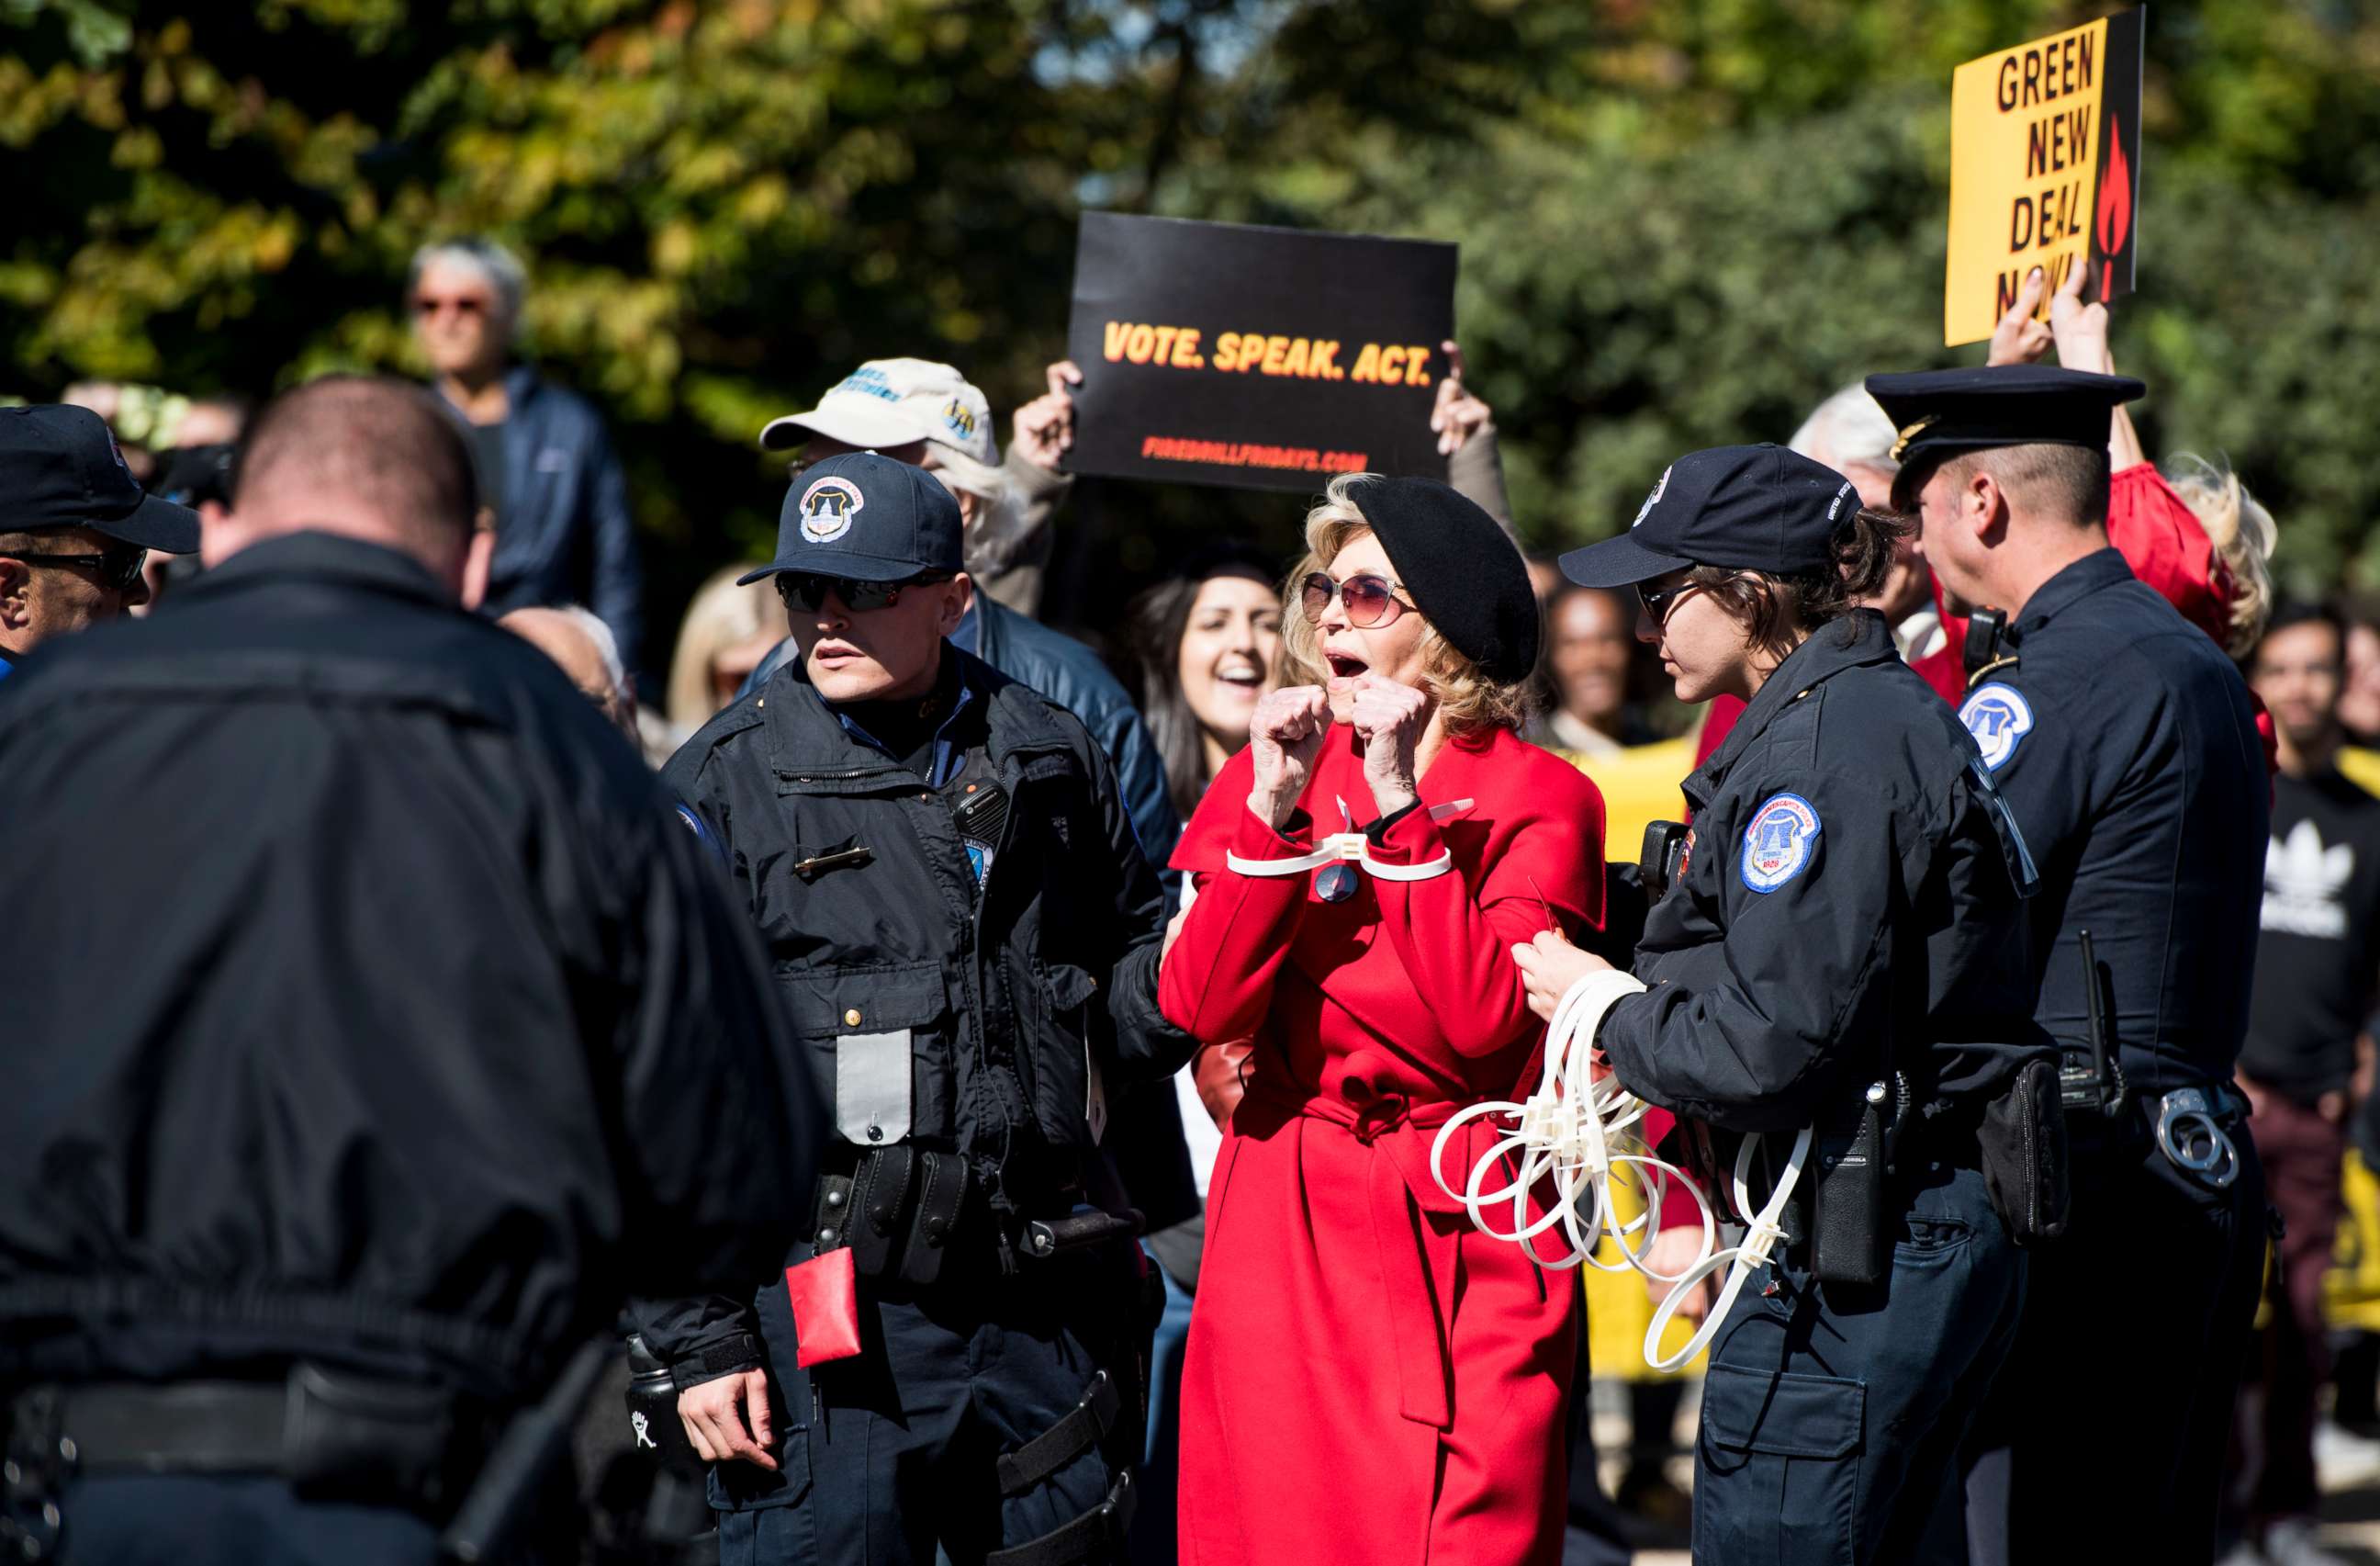 PHOTO:U.S. Capitol Police arrest actress Jane Fonda along with Sam Waterston and other climate activists after blocking 1st Street in front of the Library of Congress on Oct. 18, 2019. 